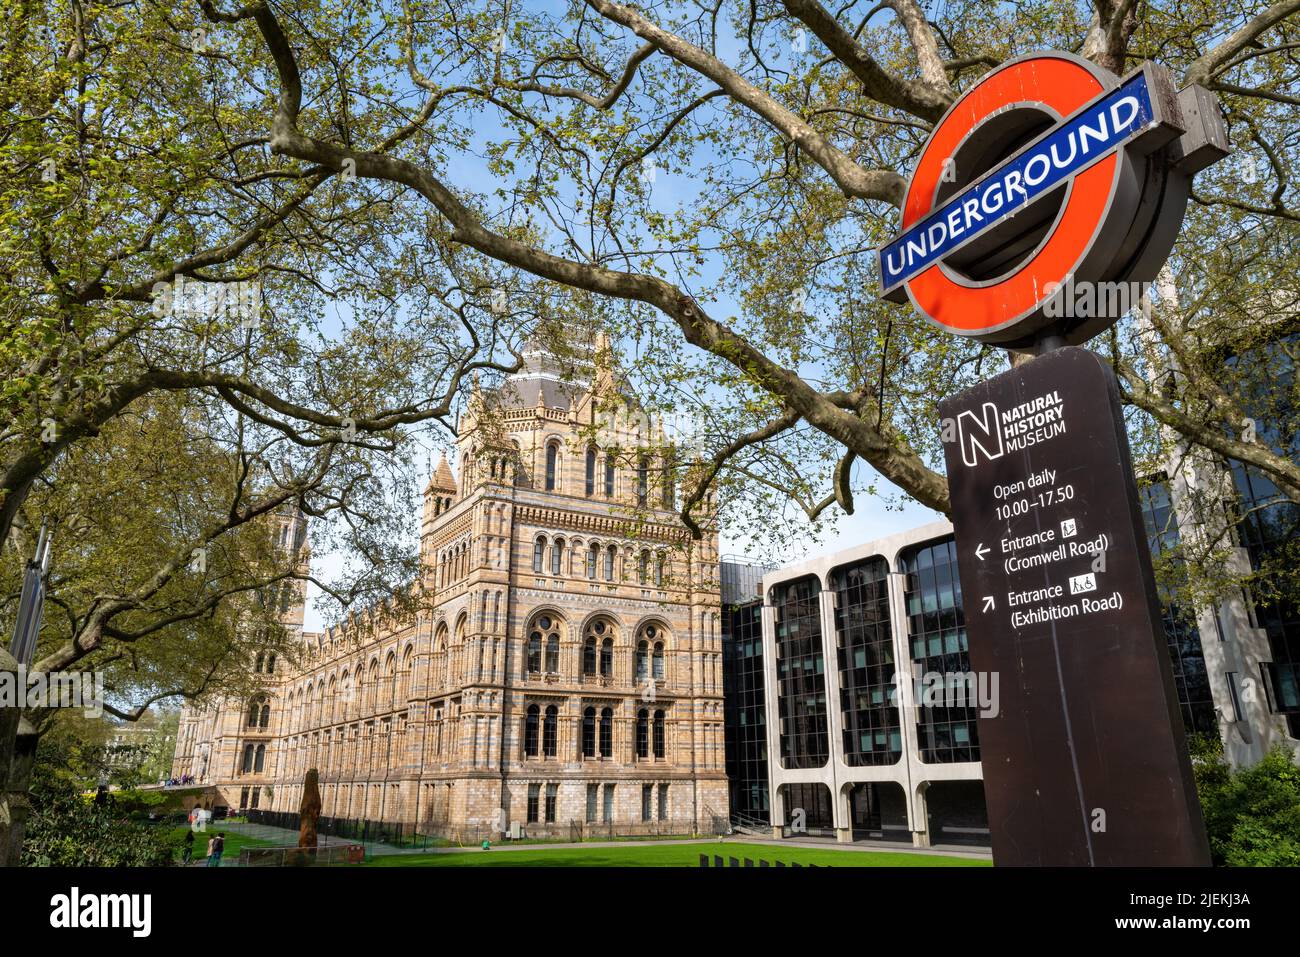 London, UK - 17th April 2022: Exterior of the Natural History Museum with London Underground sign and information board. Stock Photo